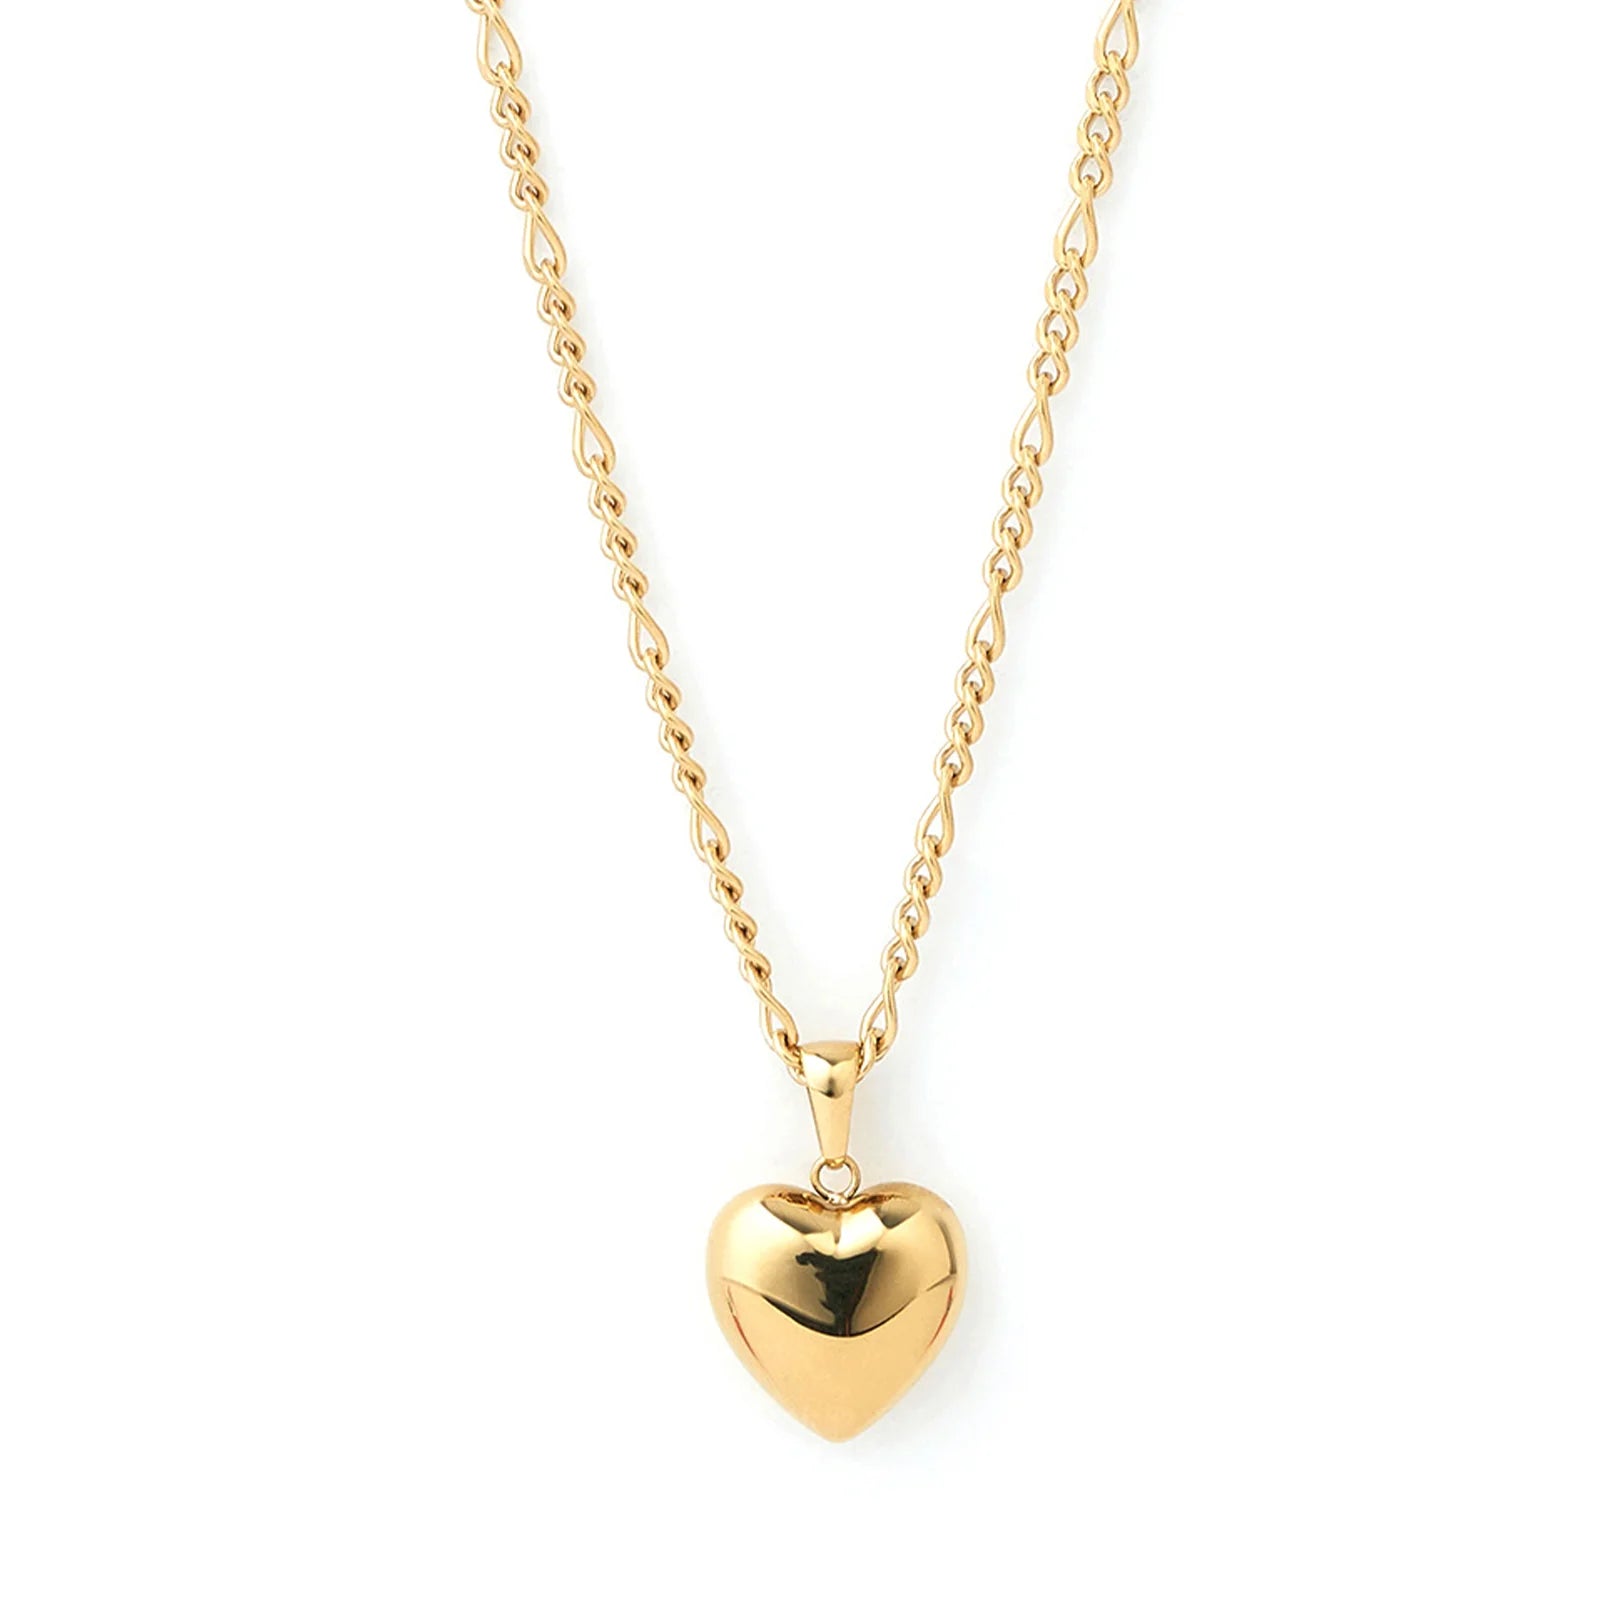 ARMS OF EVE ROSE HEART NECKLACE: GOLD